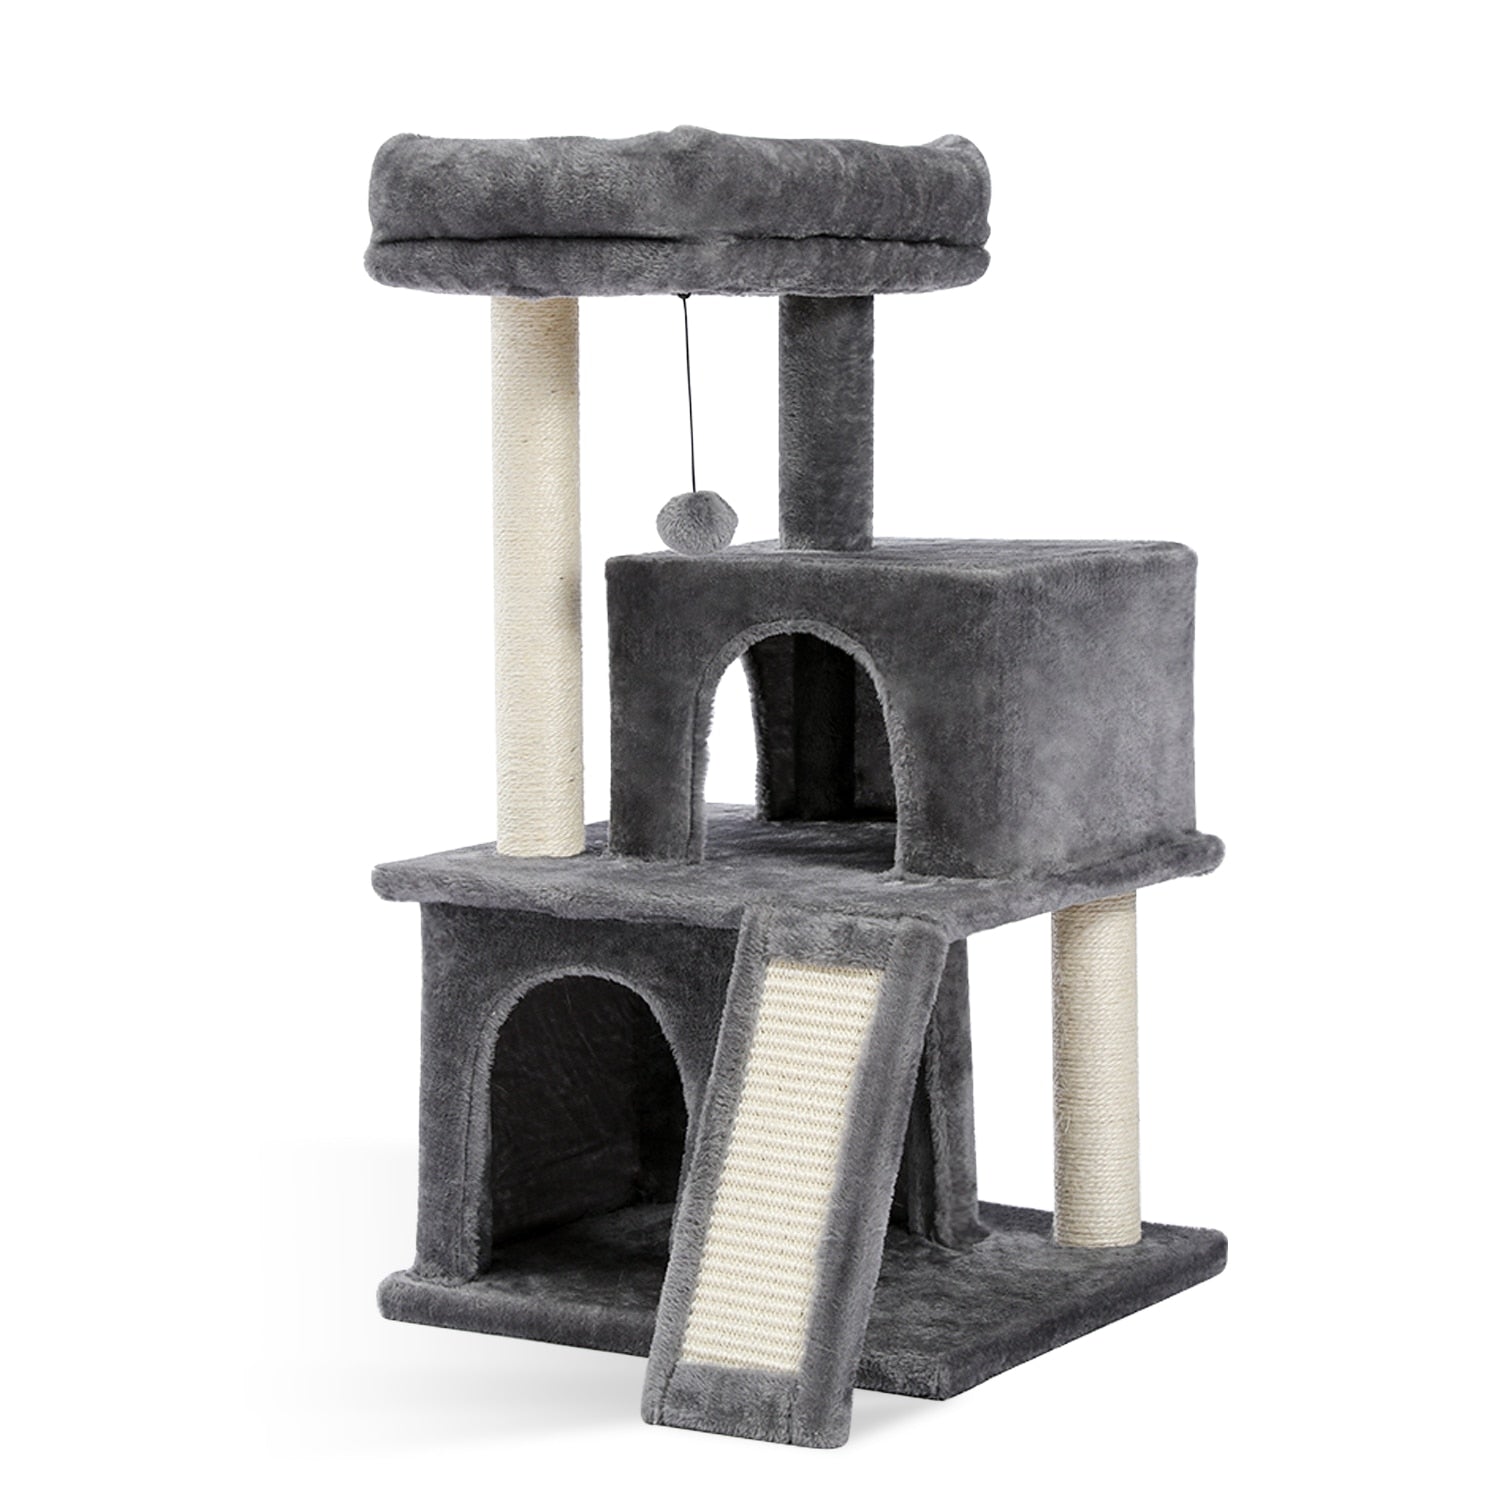 2022 New Design Luxury Large Cat Climbing Frame Multi-Layer Scratching Post With Resistant Sisal Cat Tree Kittern Playground - RY MARKET PLACE